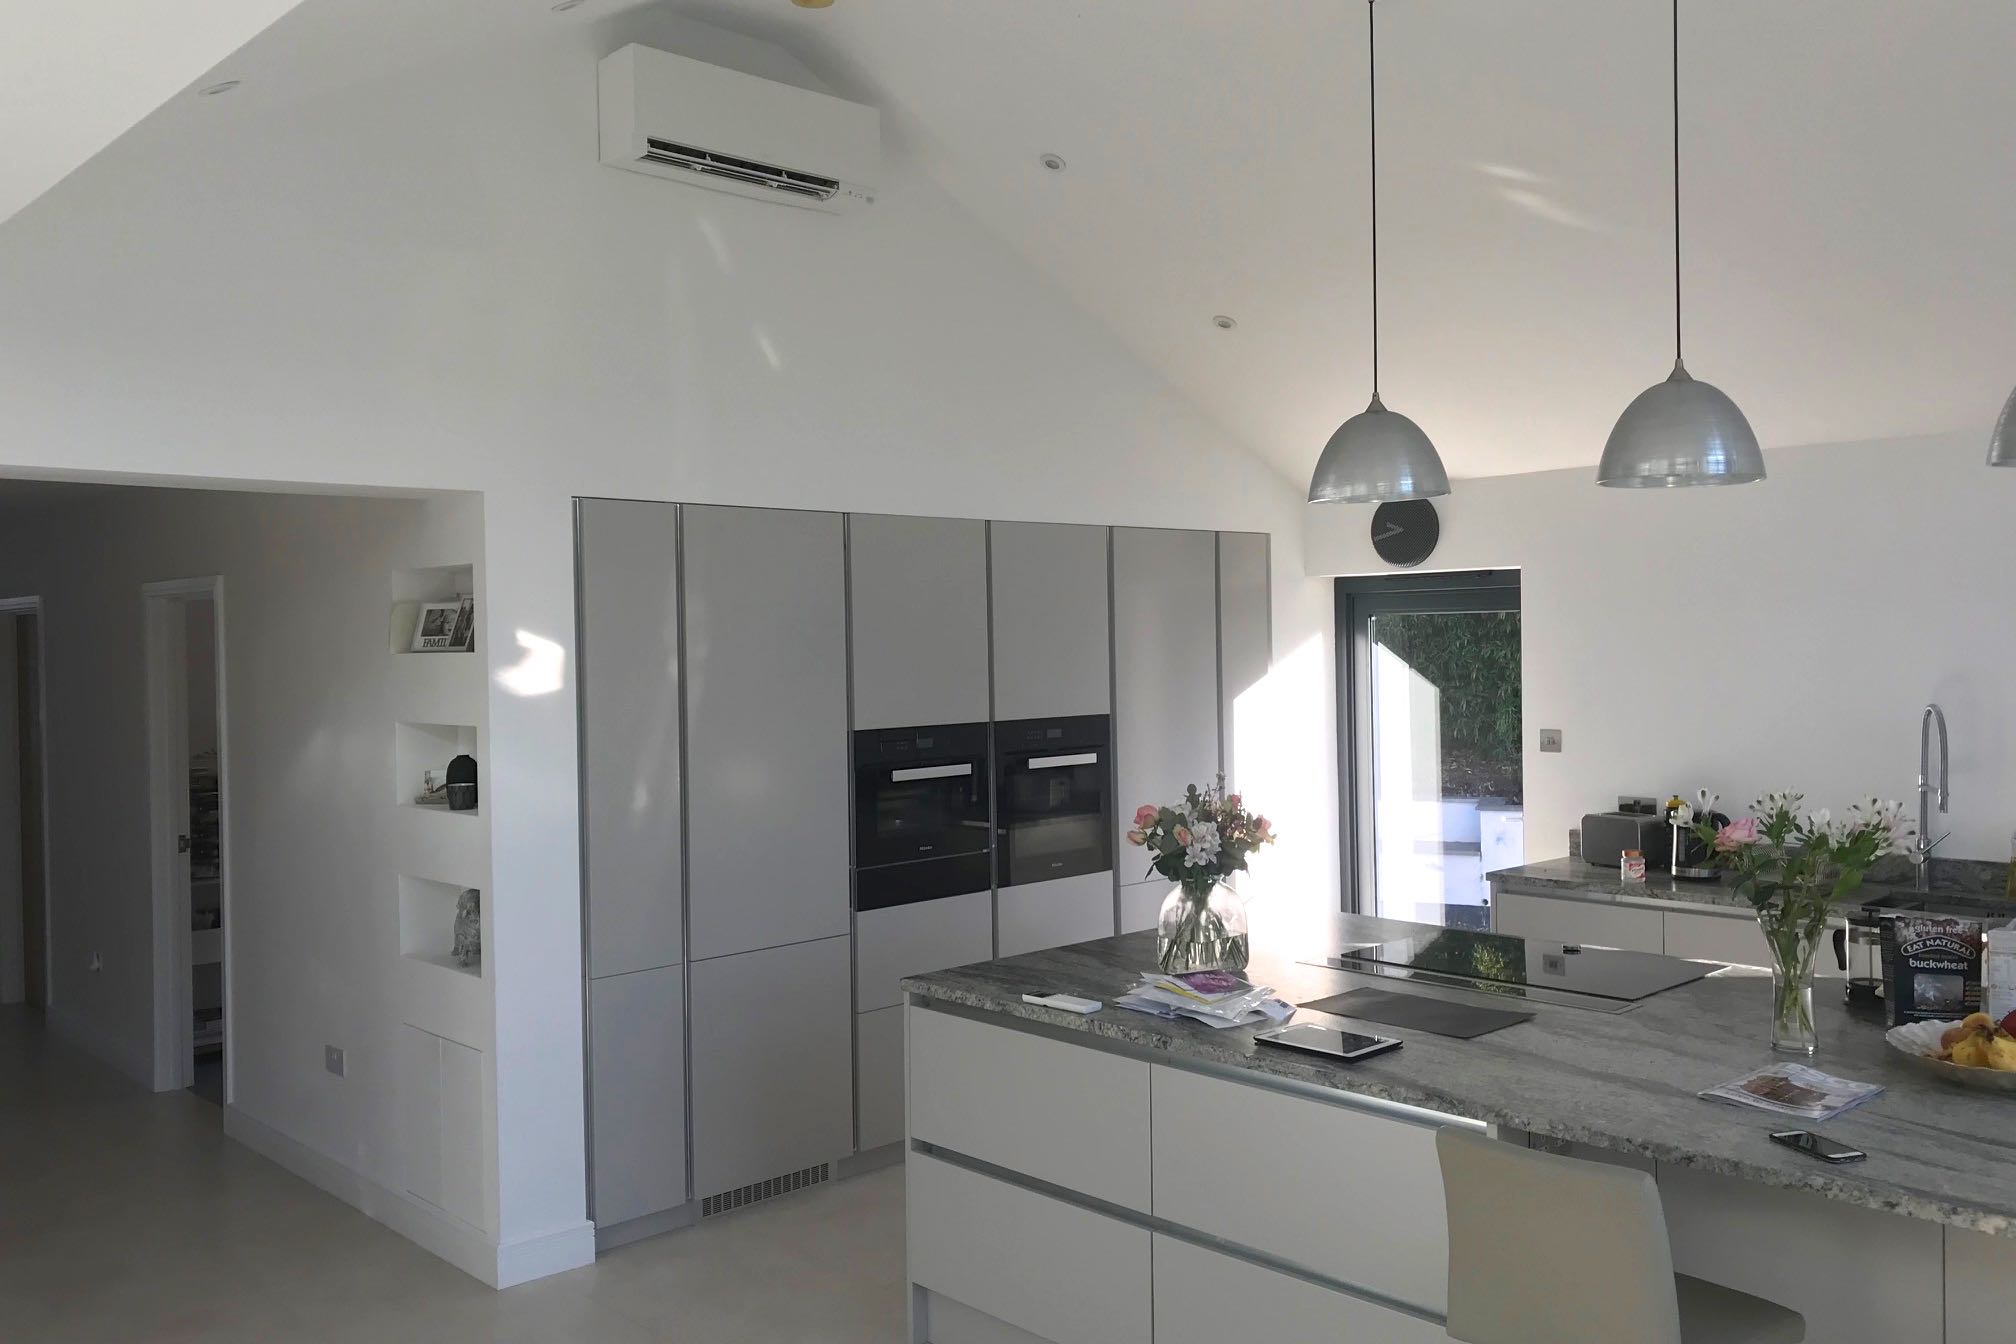 White wall mounted domestic air conditioning unit in open plan kitchen over fridge an oven units side view